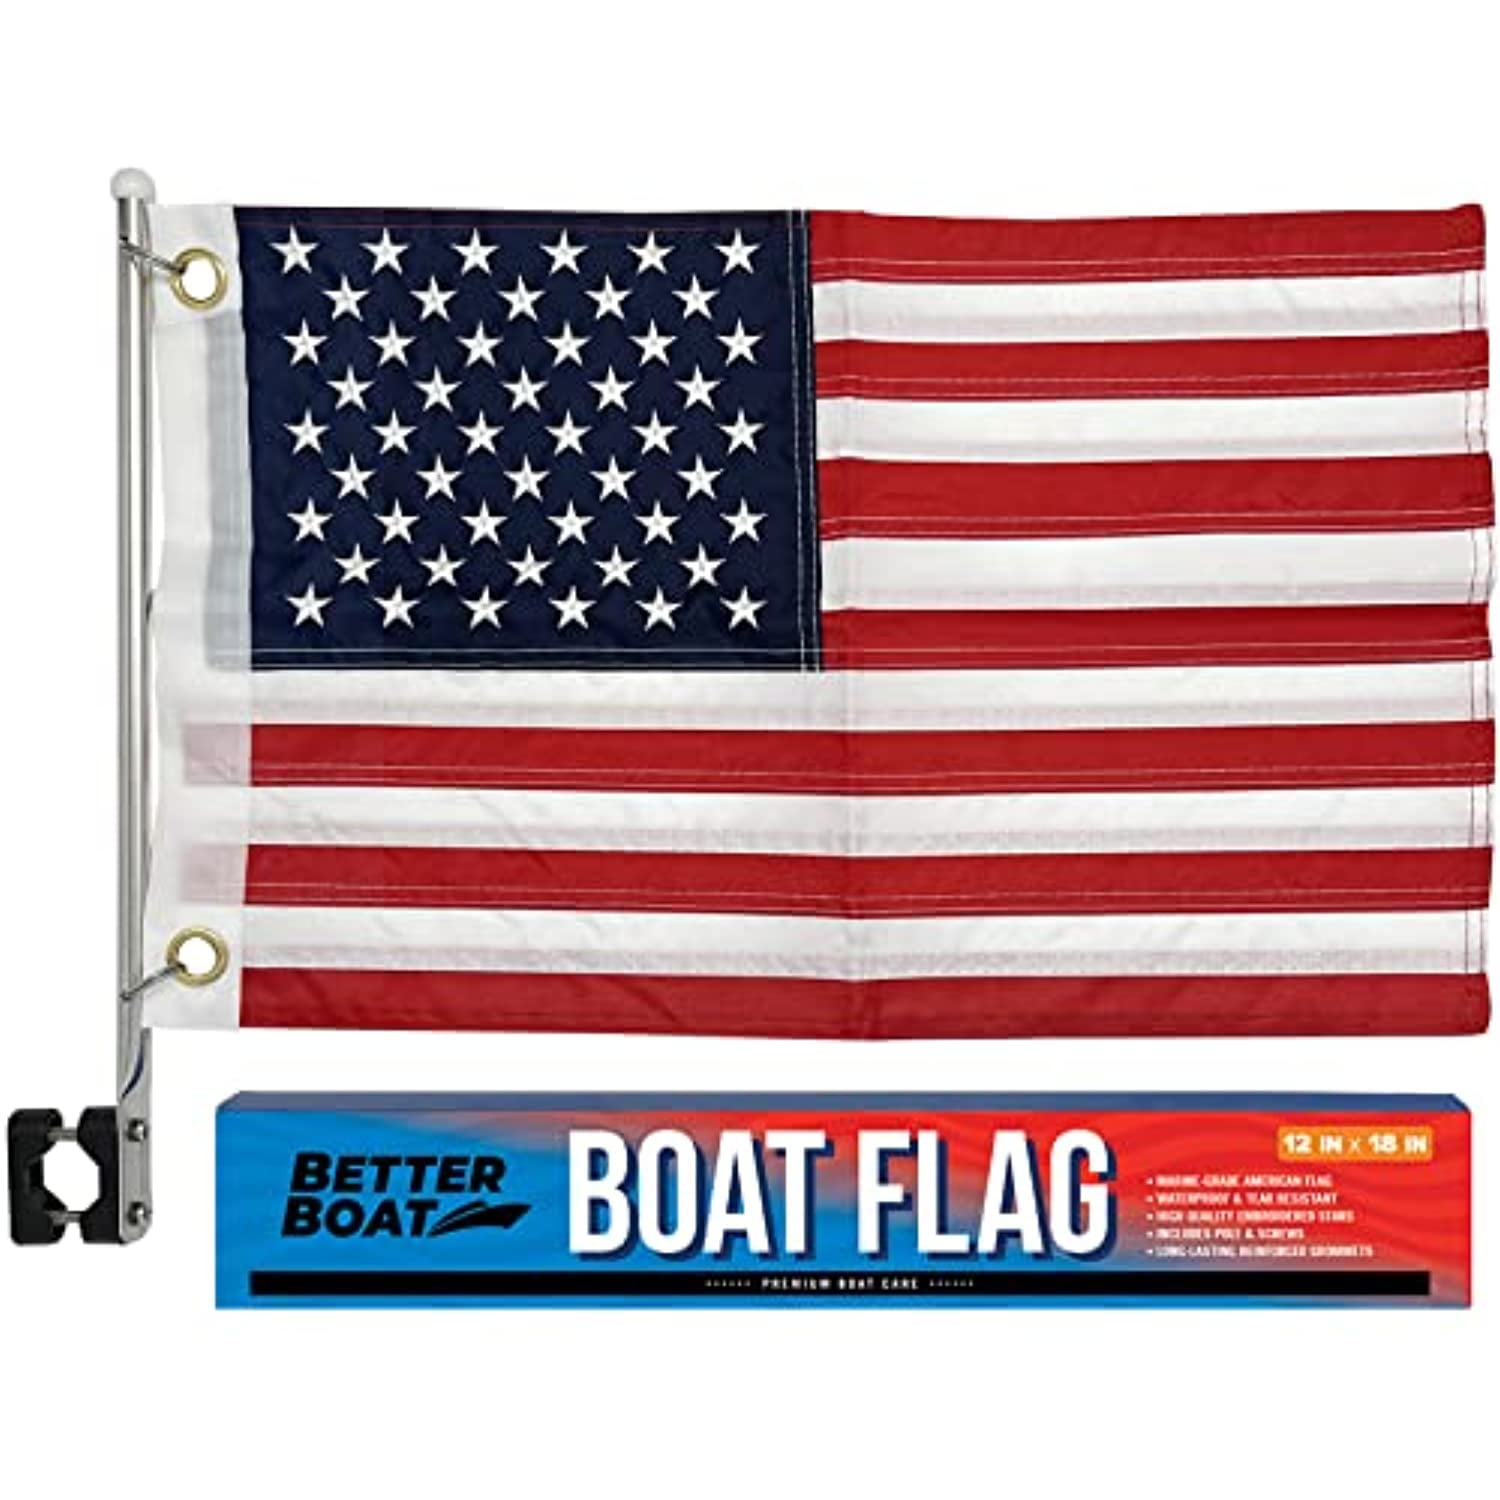 6 x Wooden Flag Poles For 18" x 12" Flag Range of Boat Flags 